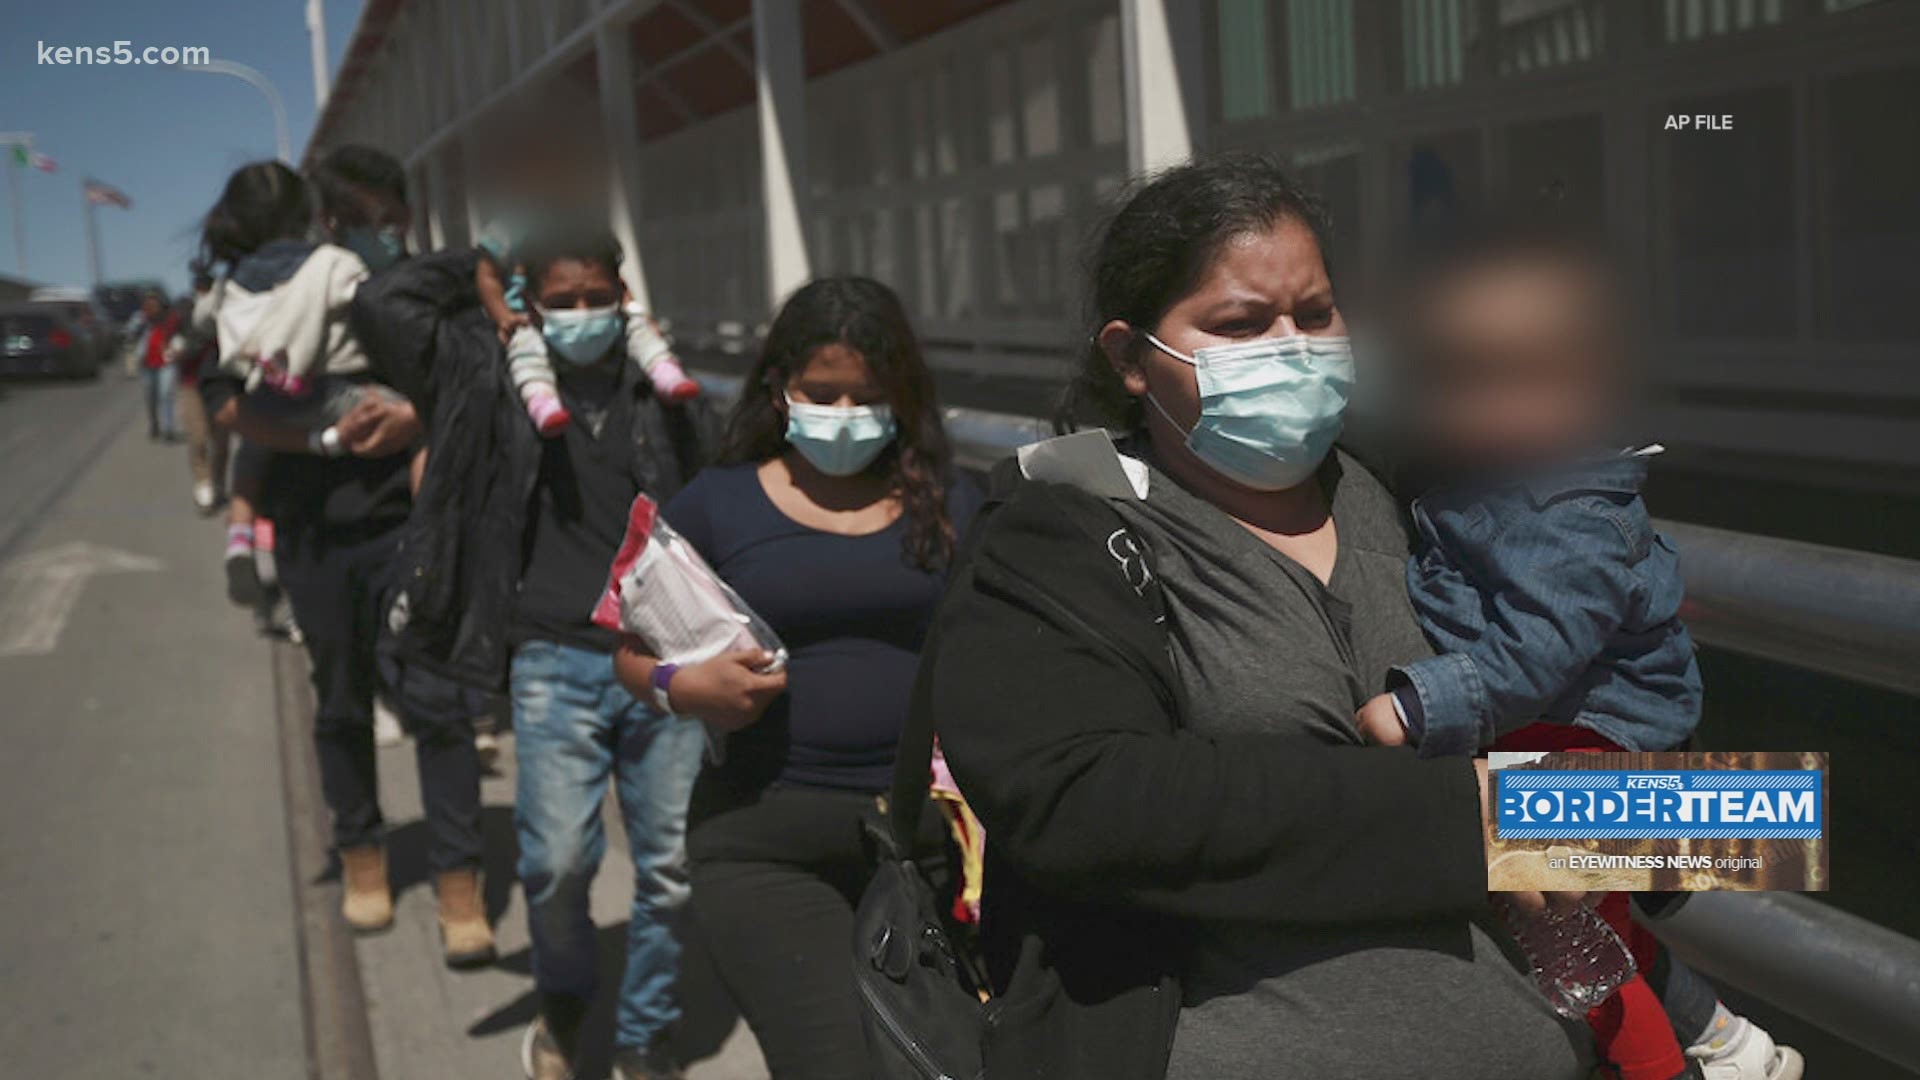 Advocates tell KENS 5 that, sometimes, migrants are being told they're being taken somewhere in the U.S. when they're actually being expelled back to Mexico.